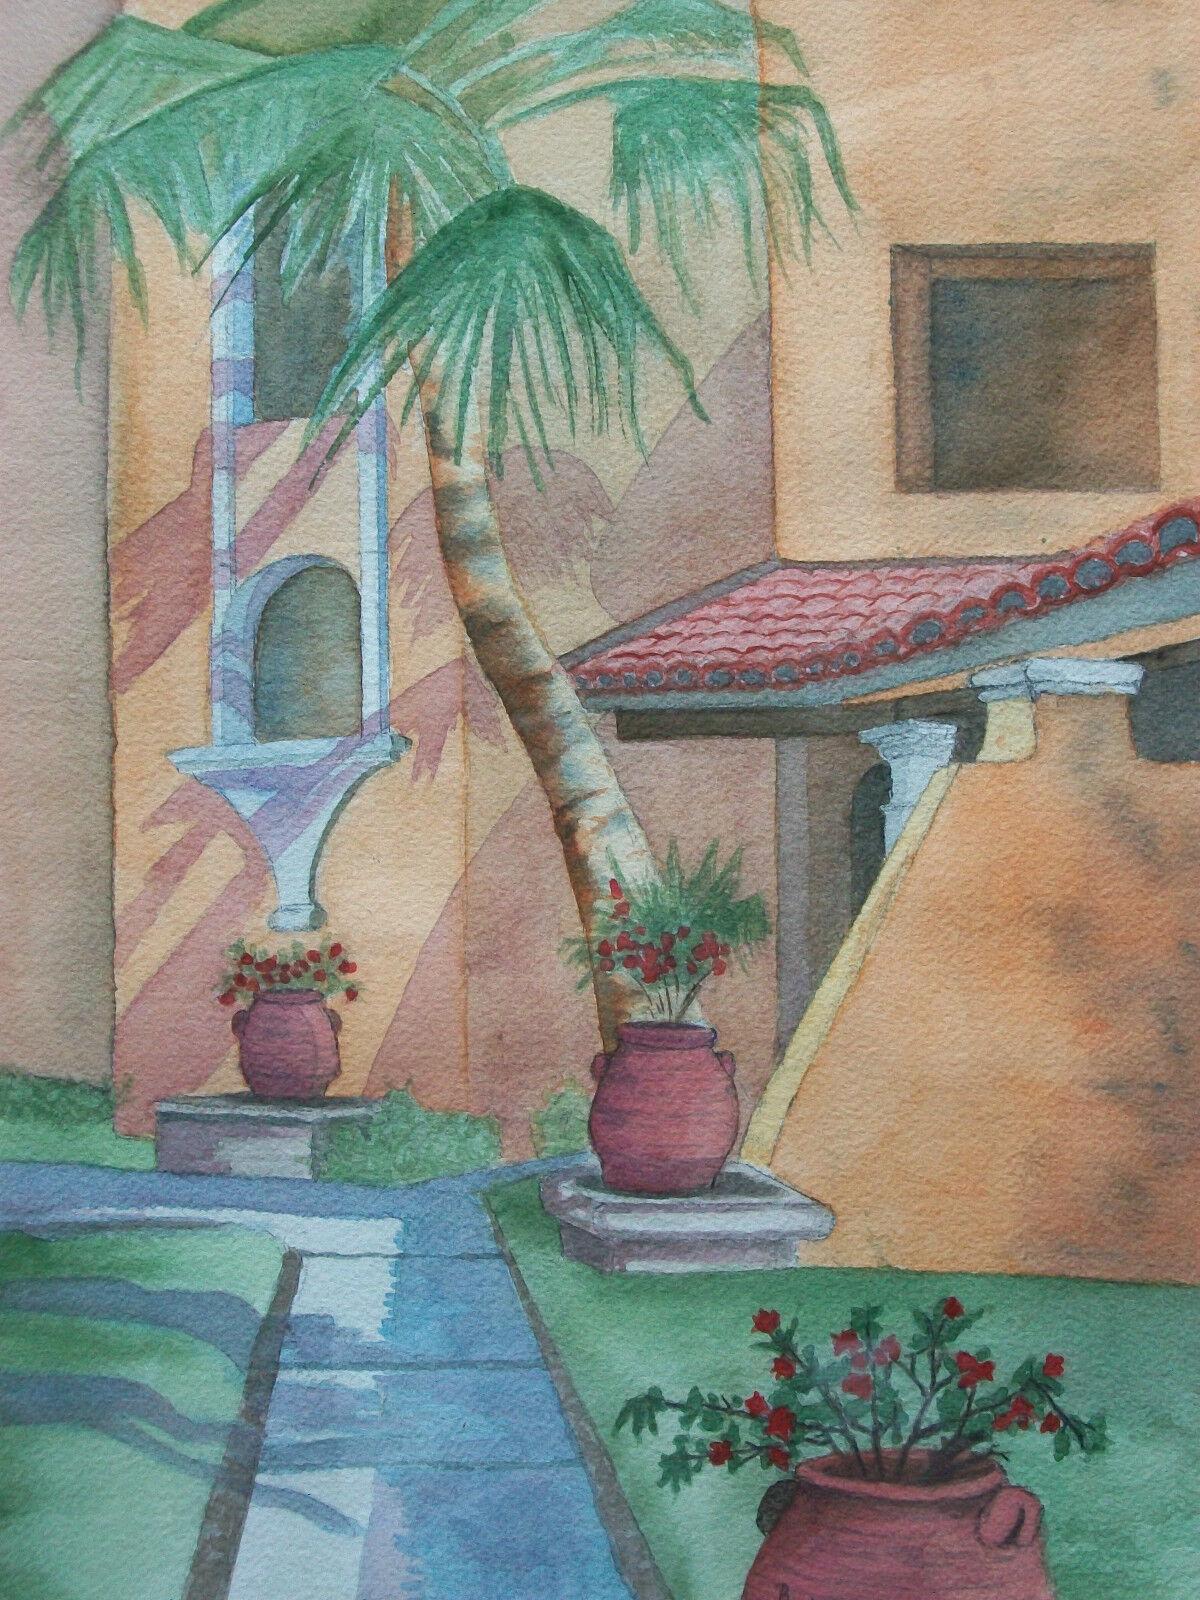 B. McKAY - 'La Jolla' - Vintage watercolor painting on paper - signed and dated lower right - titled and dated verso - contained in a bronze finish metal frame - finished with a single bevel edged matte board - circa 2000.

Excellent vintage